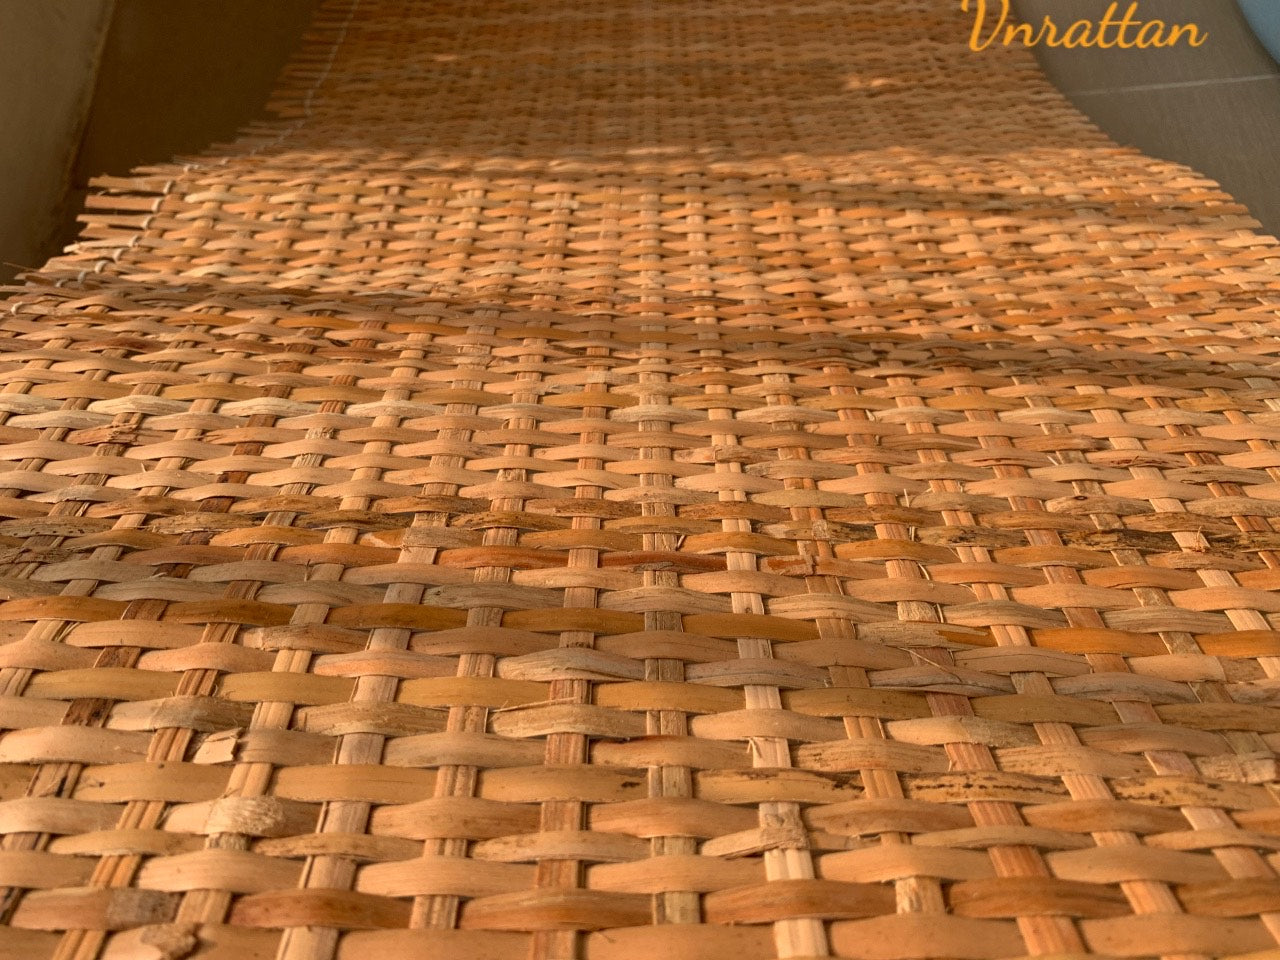 WIDTH 18 Dark Natural Radio Rattan Cane Mesh Webbing Roll/caning Material  for Cane Furniture, Restoration and DIY Project Cut to Feet 